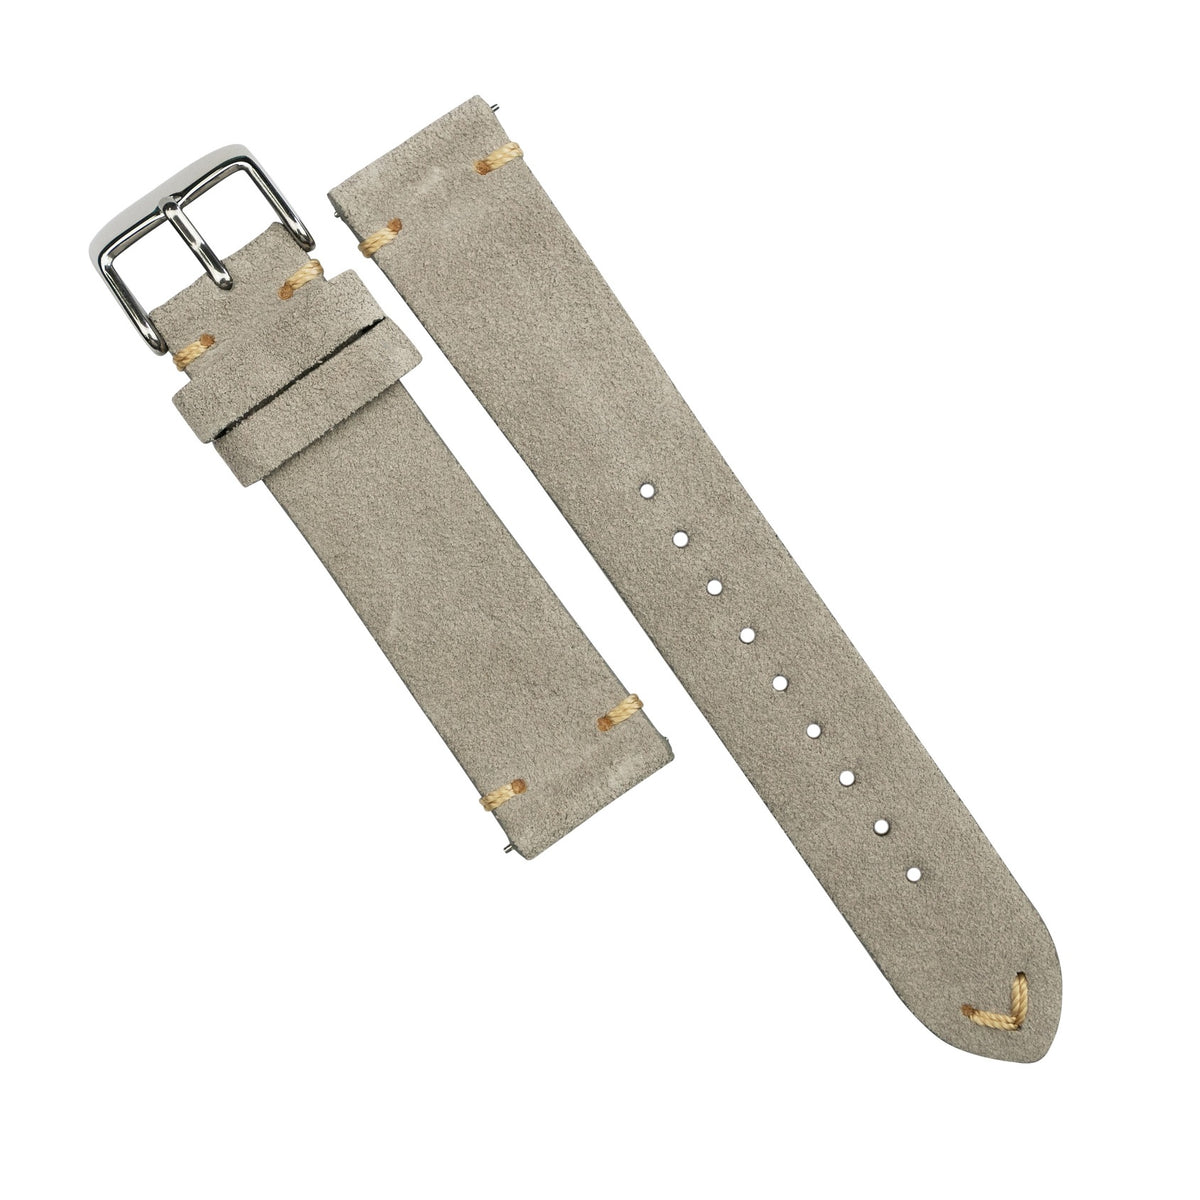 Premium Vintage Suede Leather Watch Strap in Taupe (18mm) - Nomad Watch Works MY